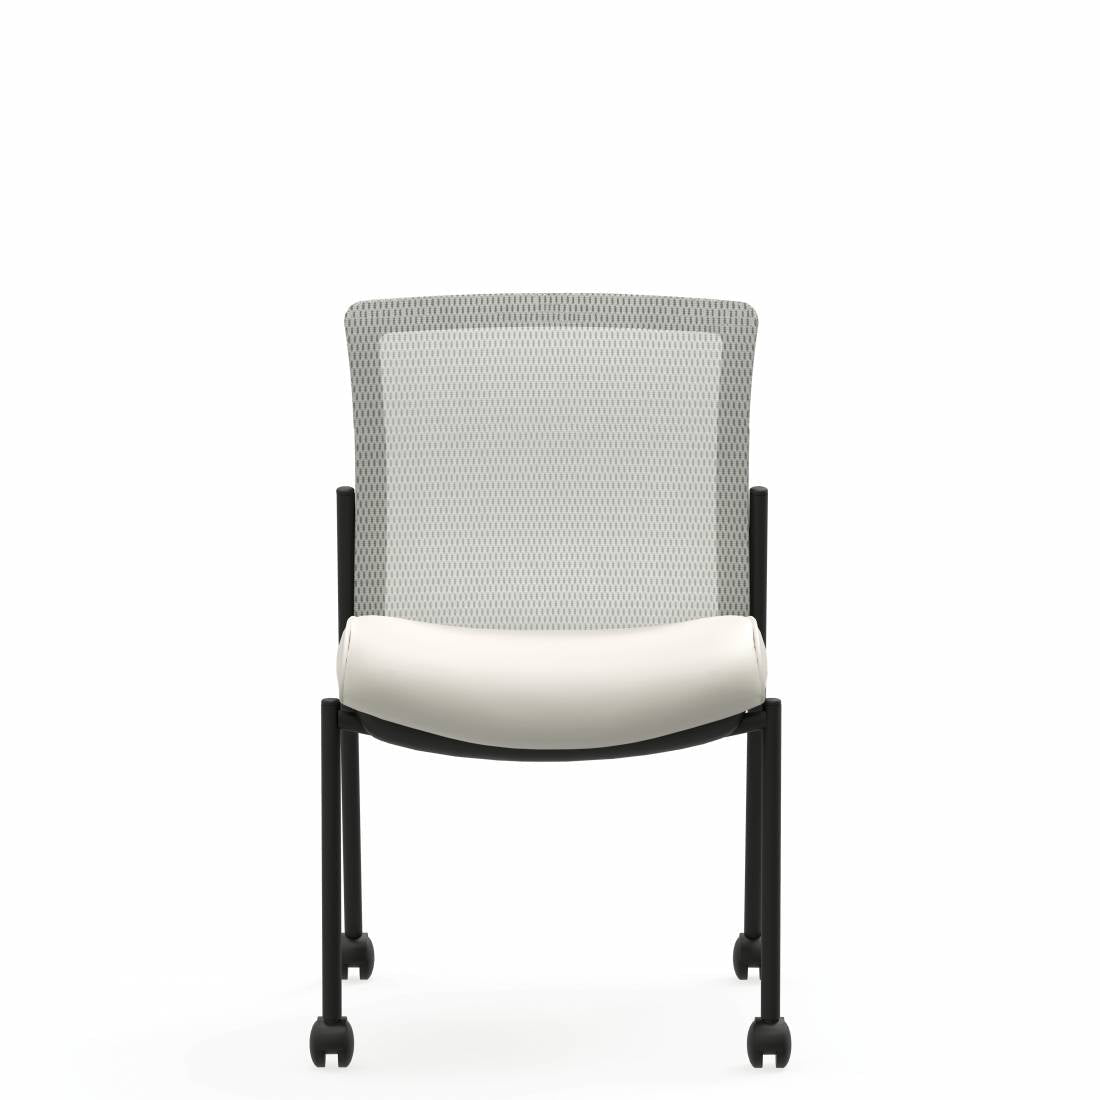 Vion Armless Mesh Back Side Chair with Casters 6324C - Vinyl